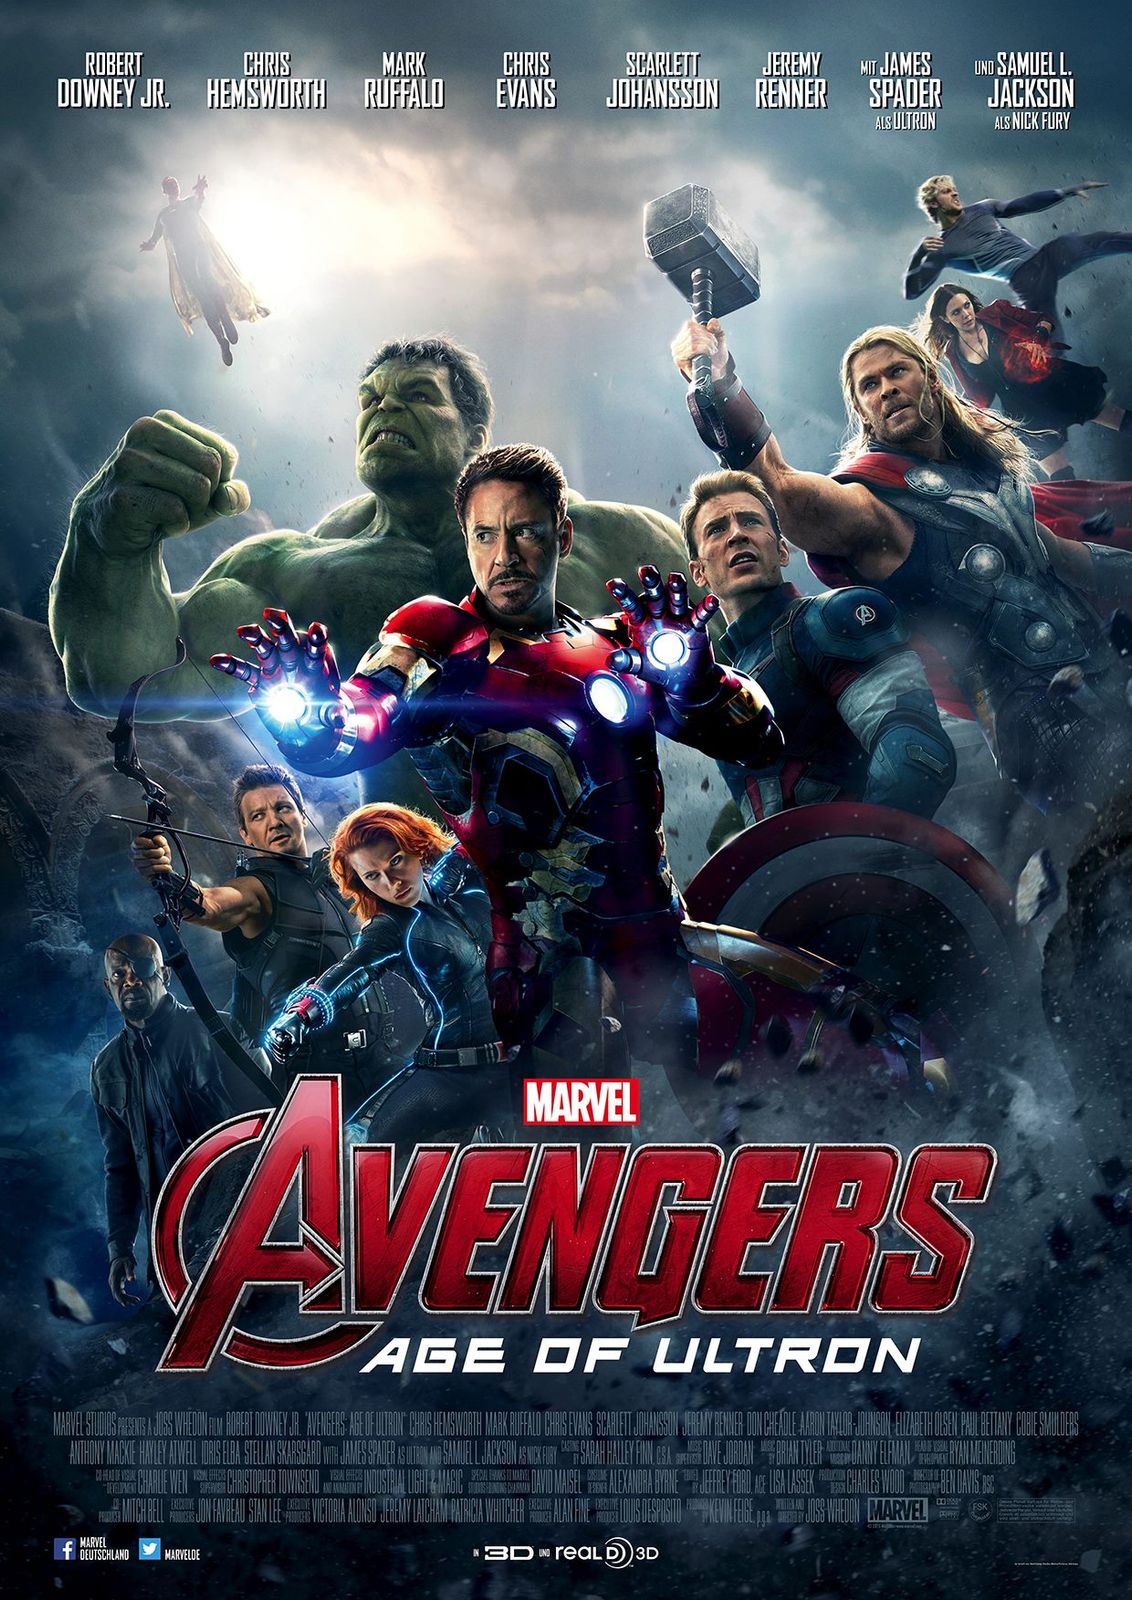 Age of Ultron Scores 2nd Biggest Weekend Box Office